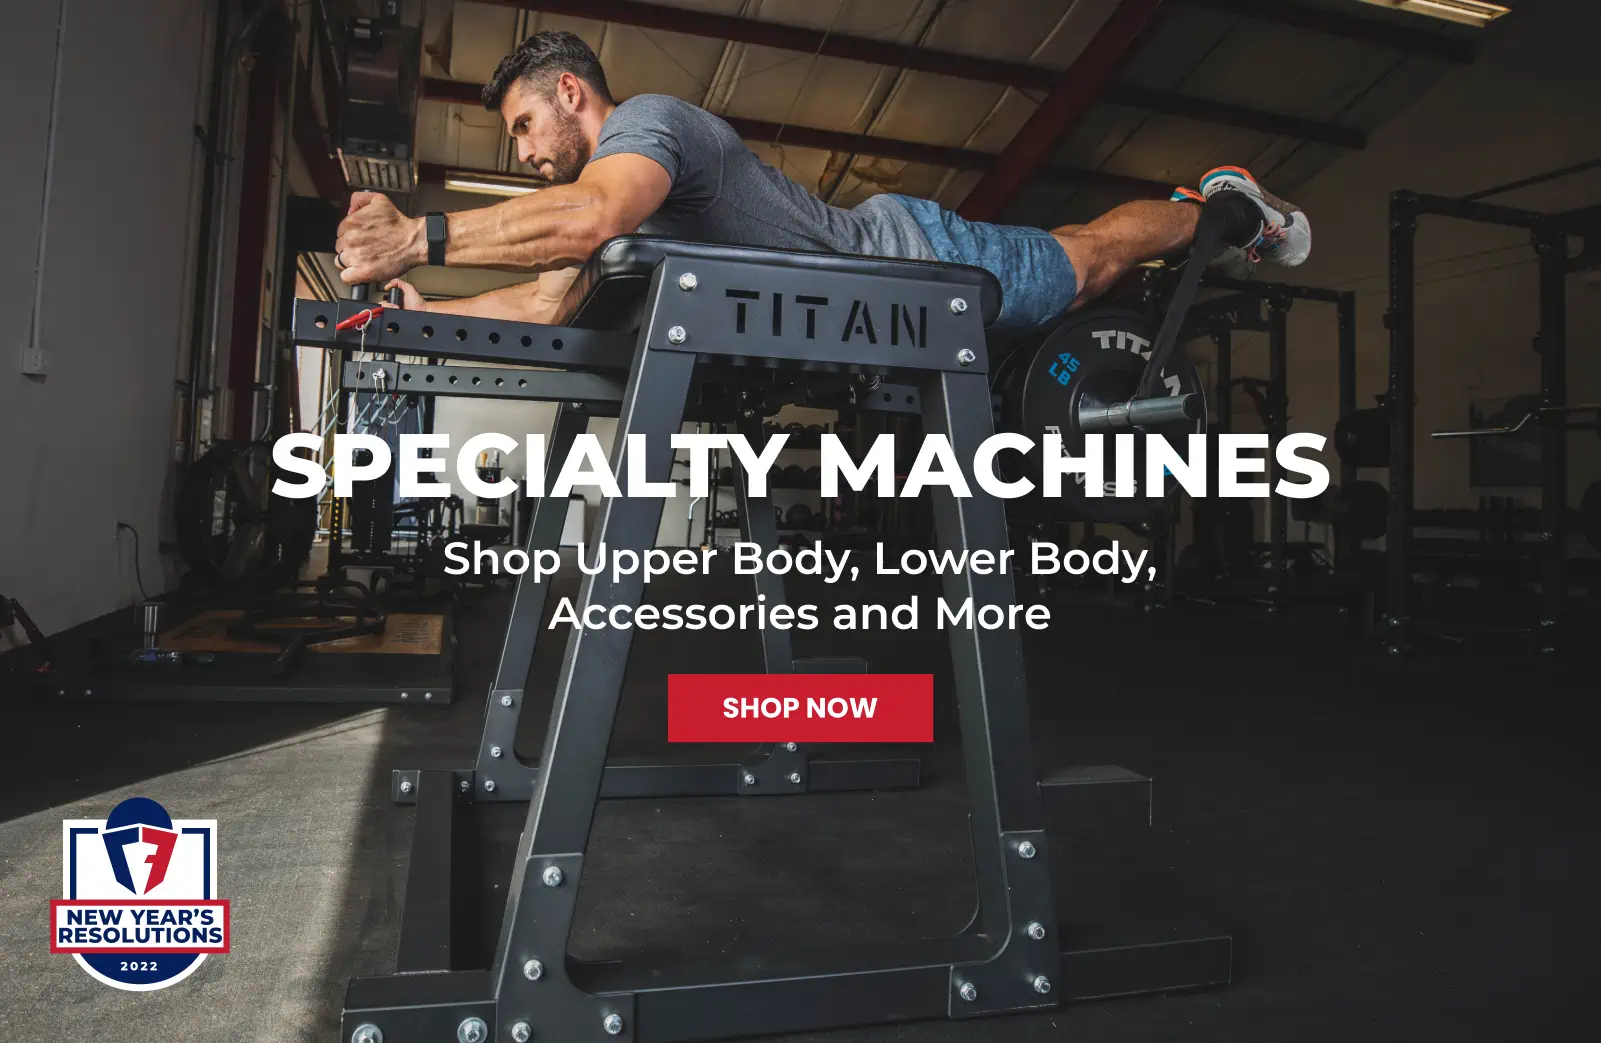 Promotion - Specialty Machines. Shop Upper Body, Lower Body, Accessories and More. Shop Now.